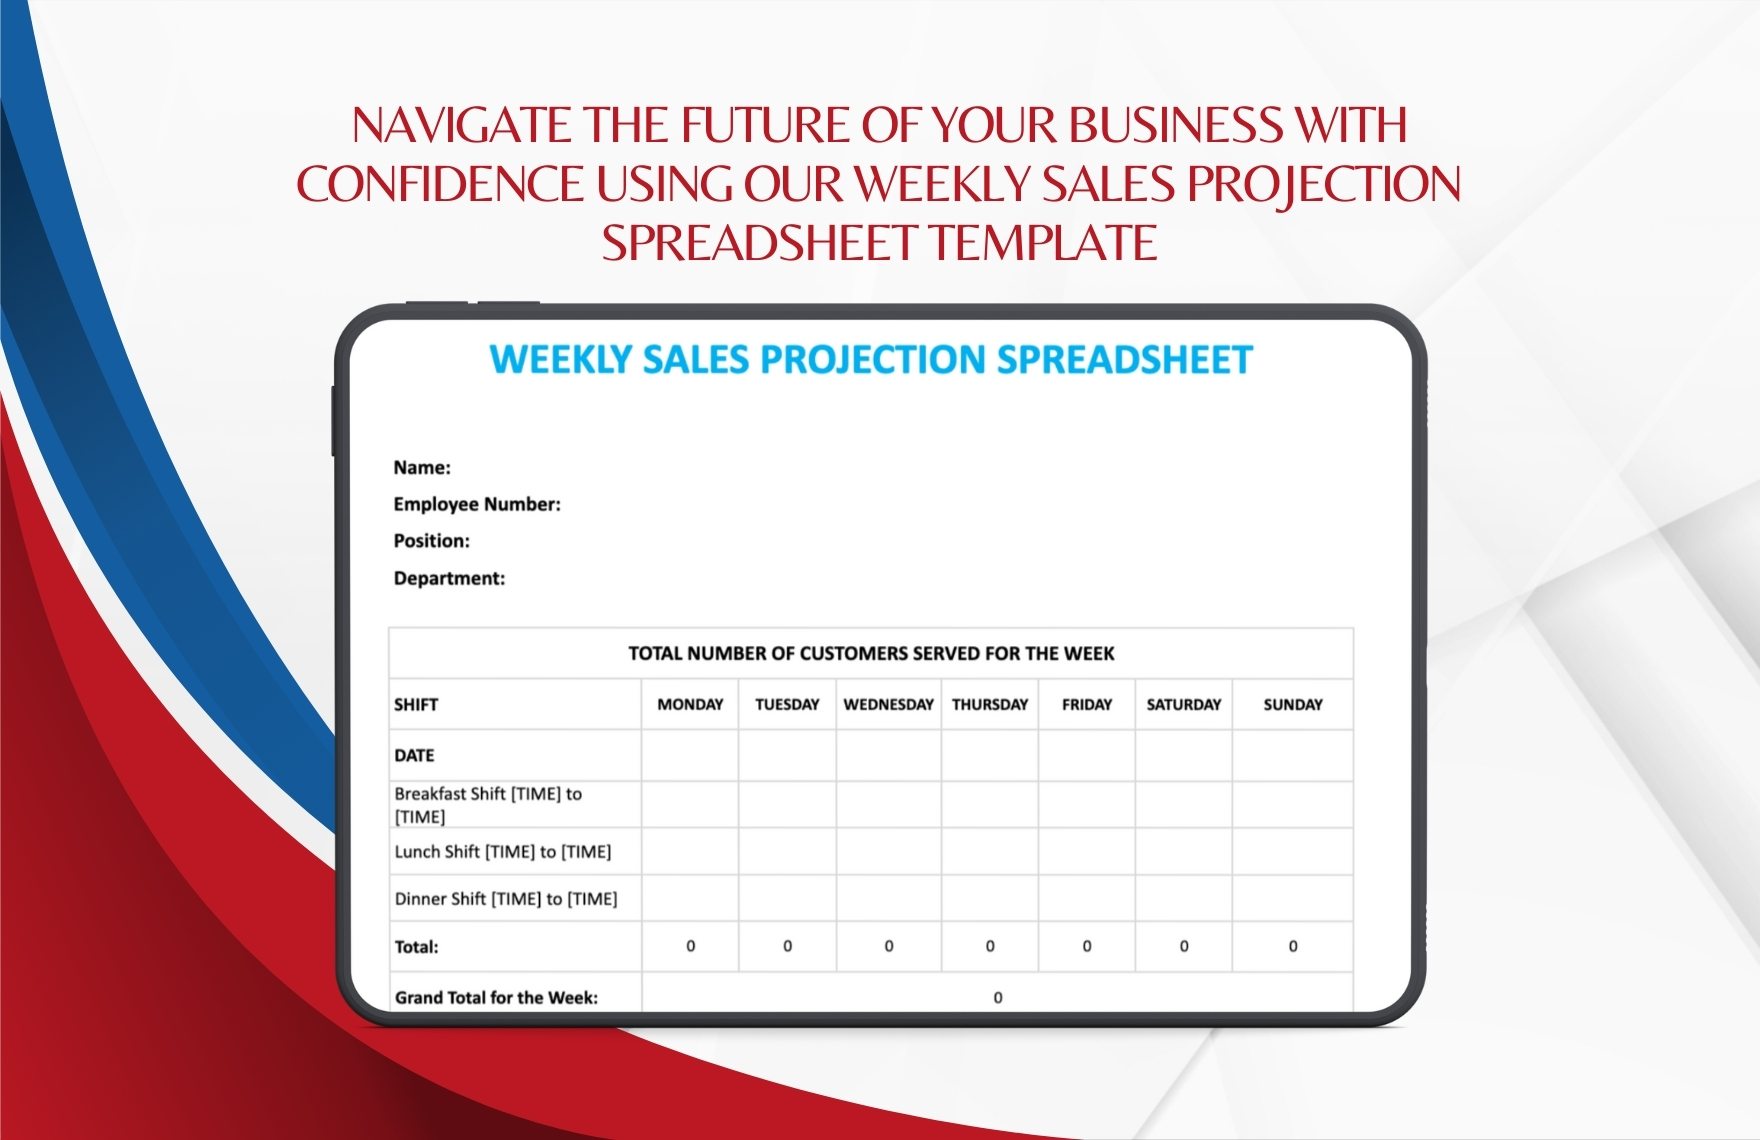 Weekly Sales Projection Spreadsheet Template